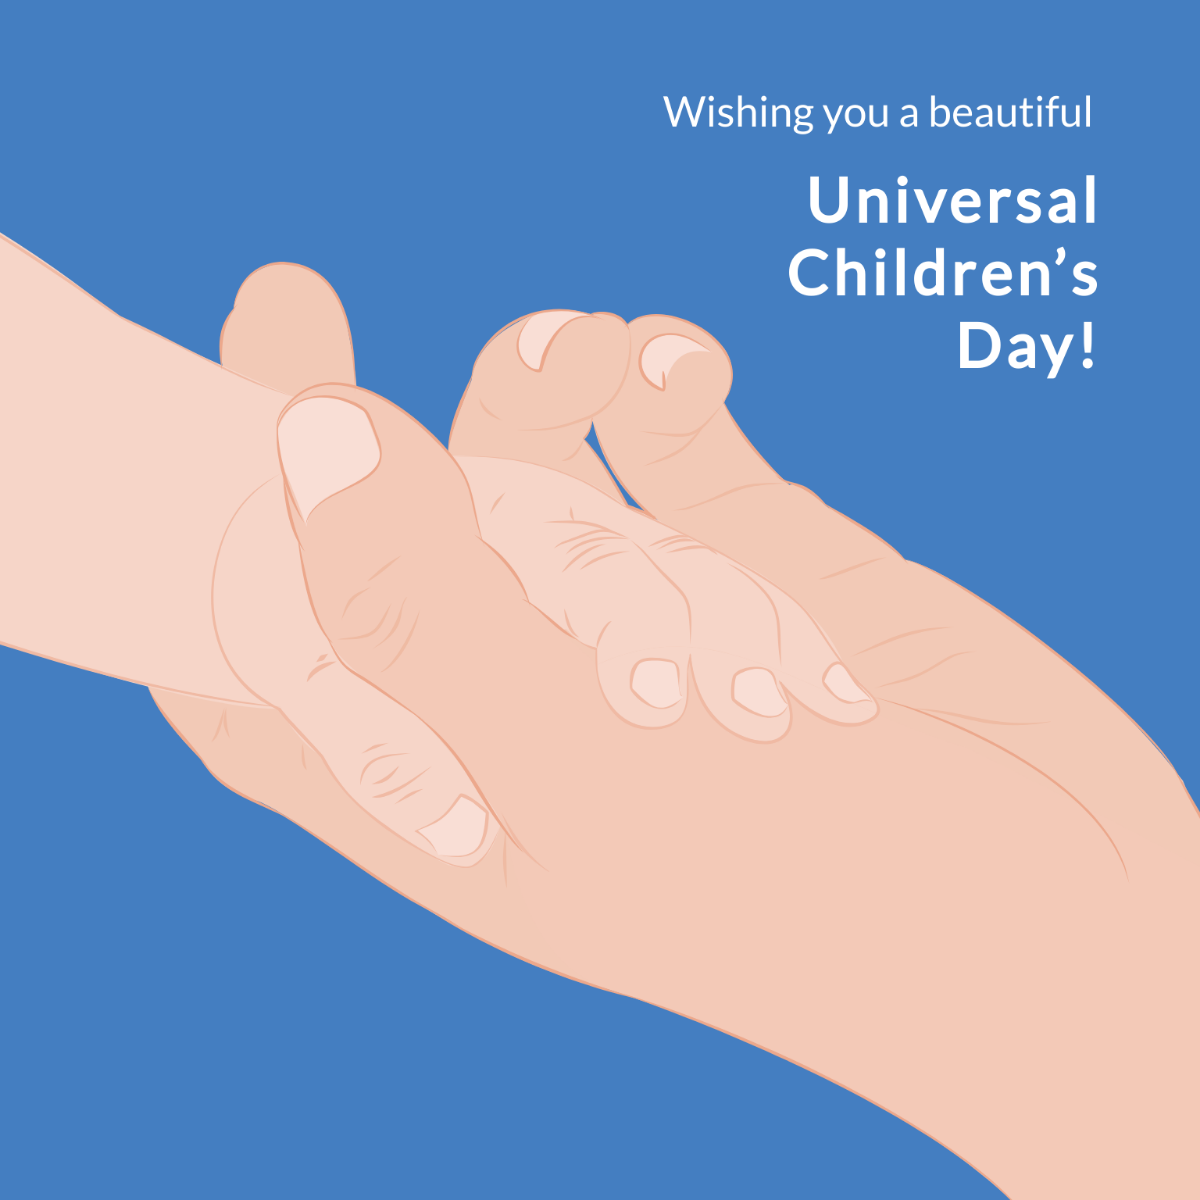 Universal Children’s Day Wishes Vector Template